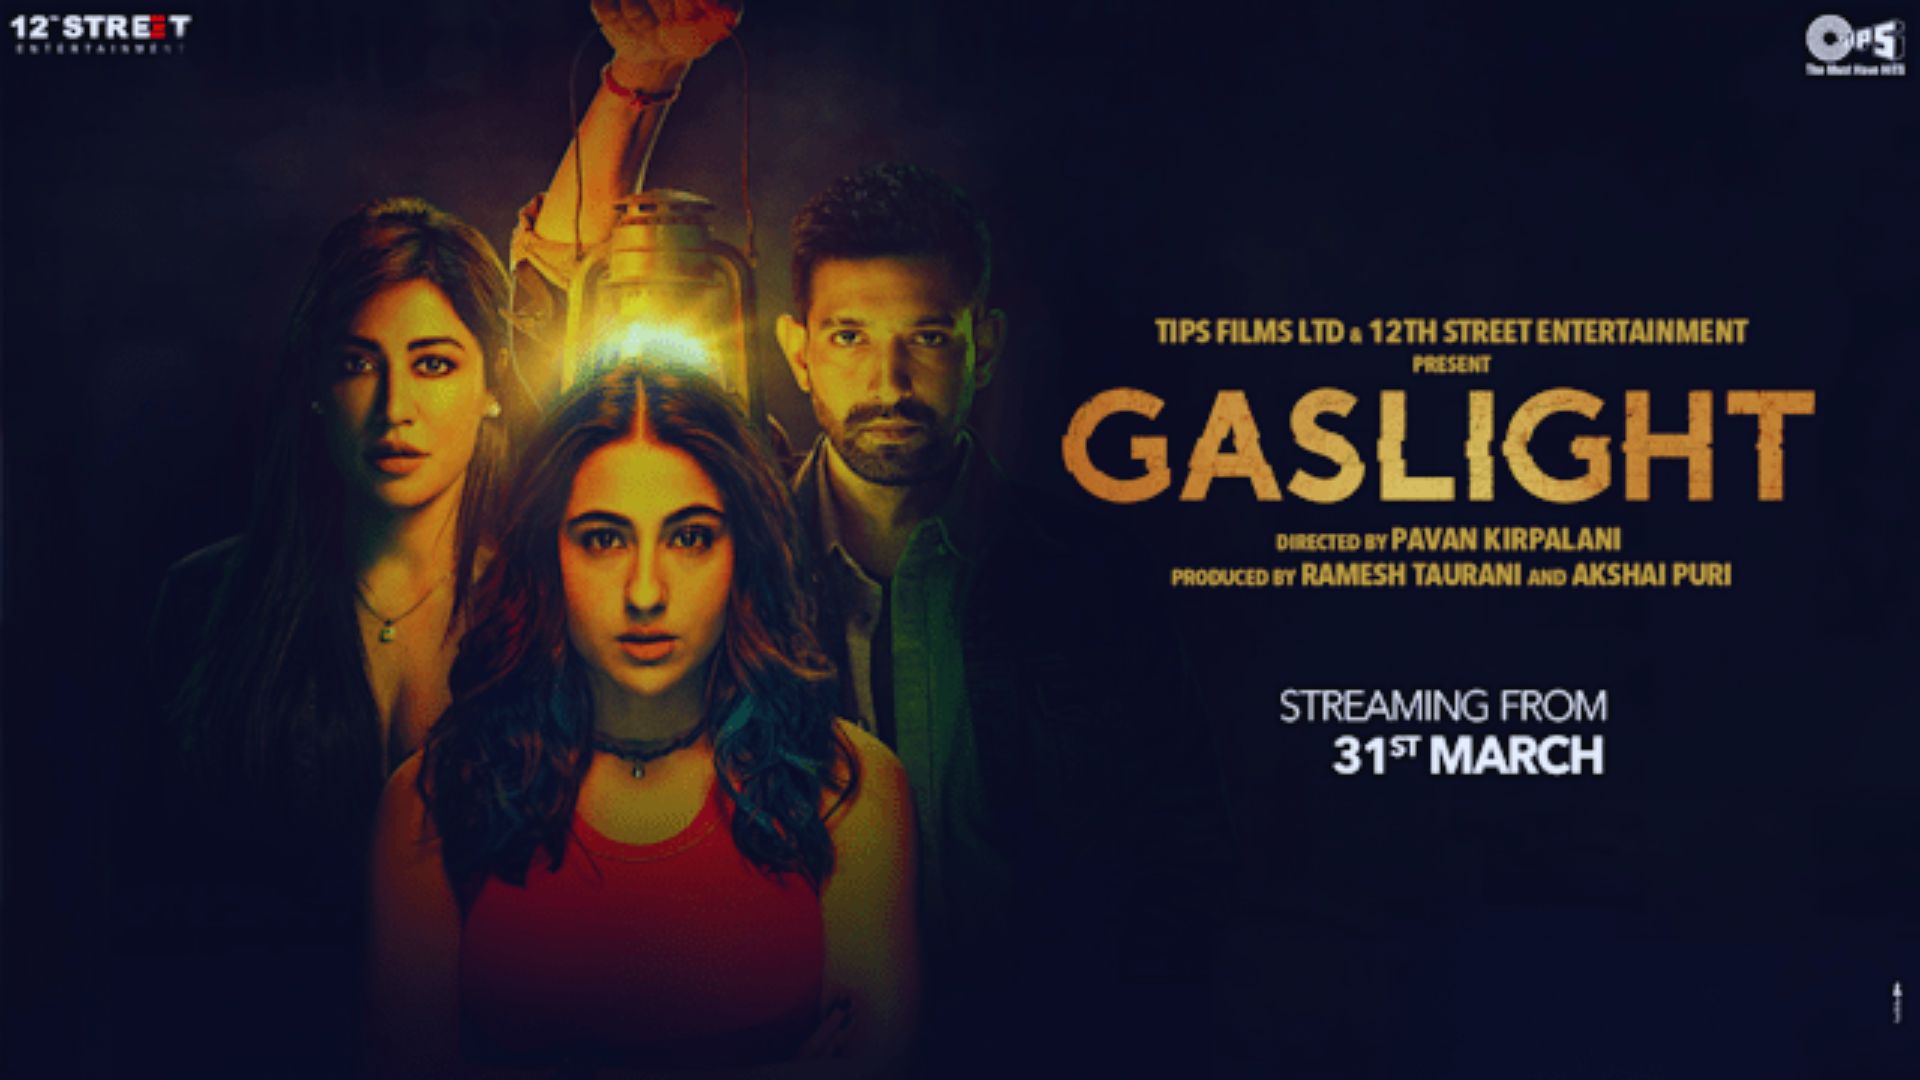 How to Watch Gaslight Movie Online For Free?